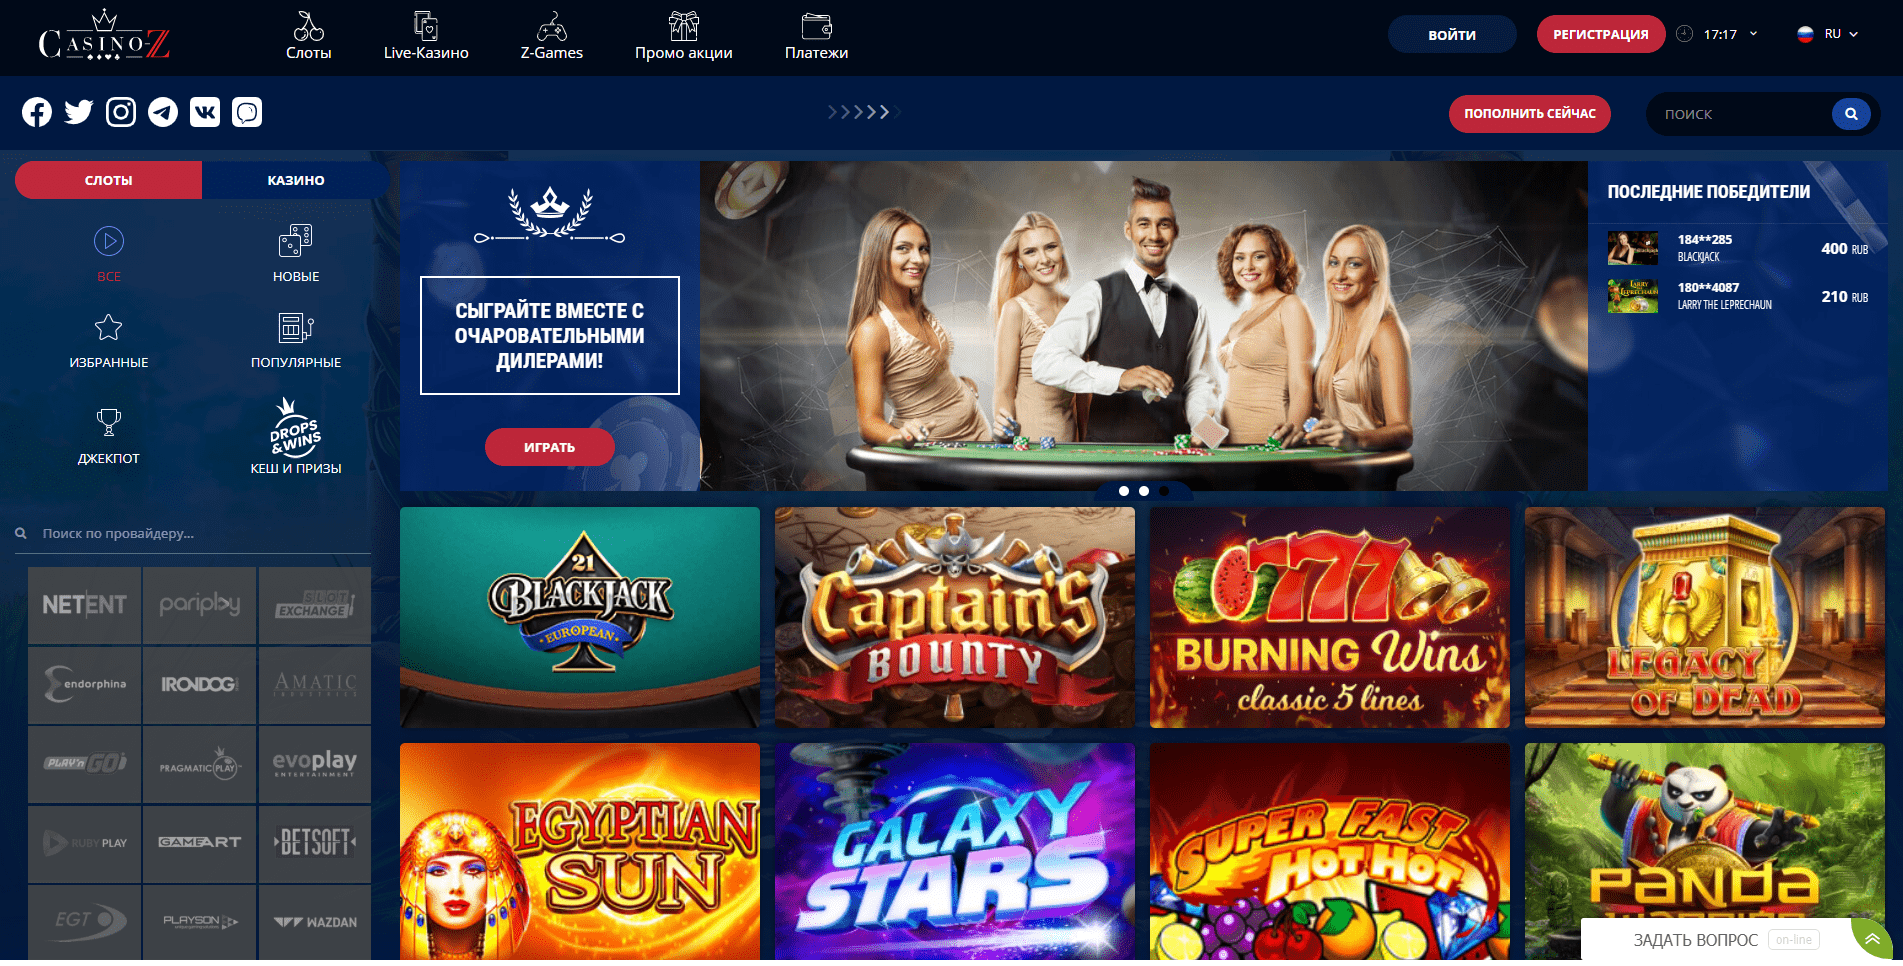 Casino x зеркало casino official org ru. Казино z. Казино z зеркало.